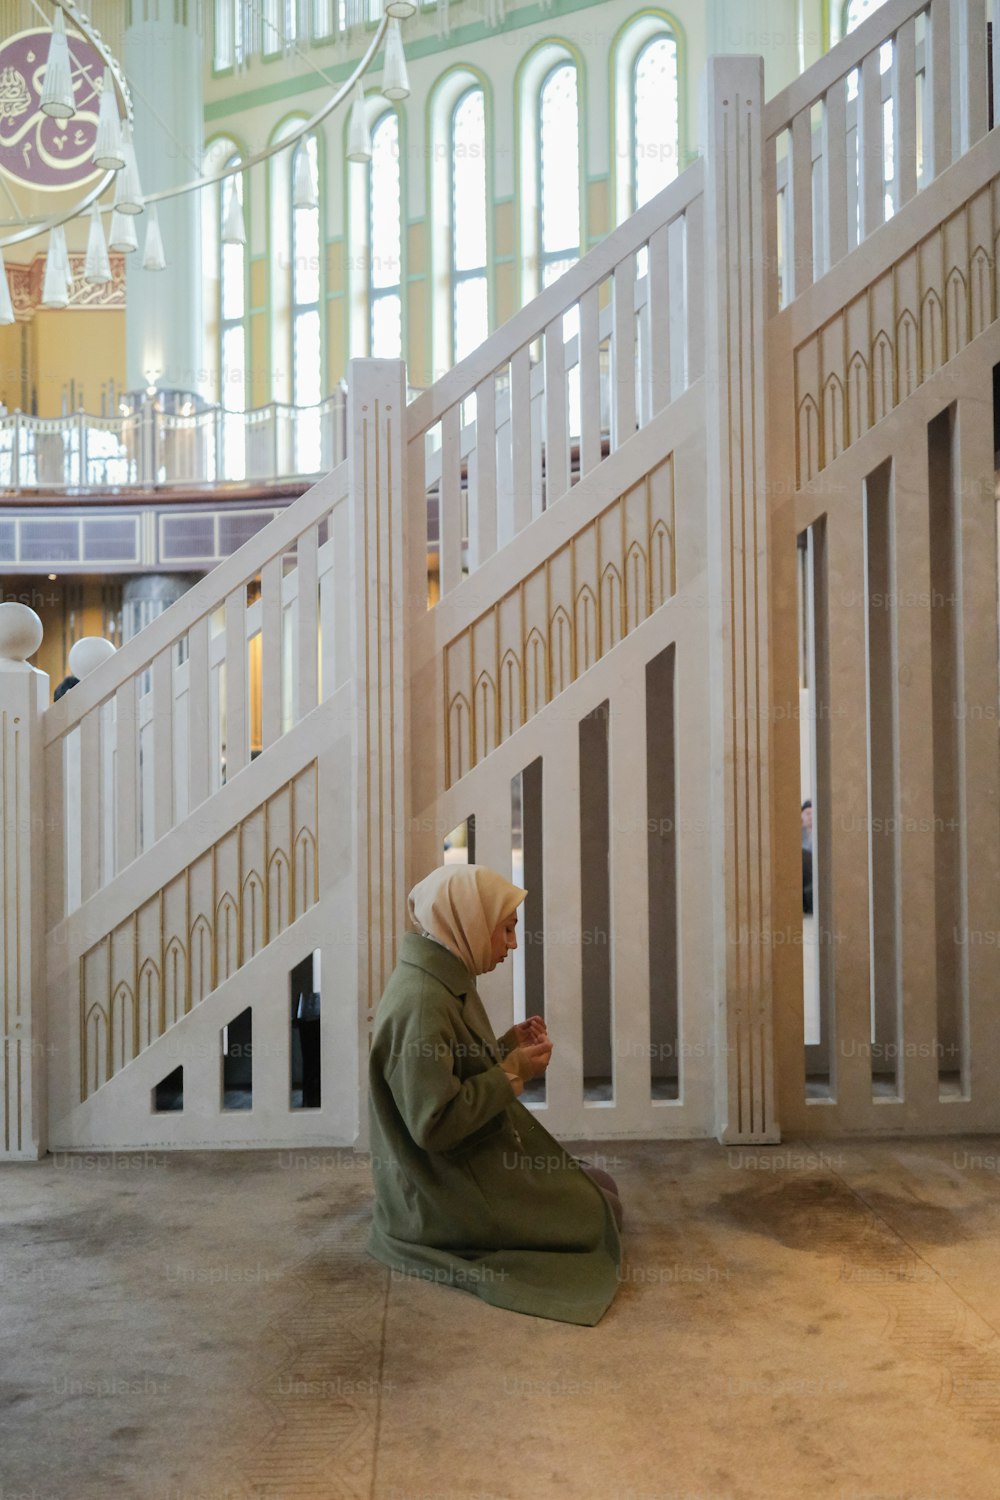 a person sitting on the ground in front of some stairs